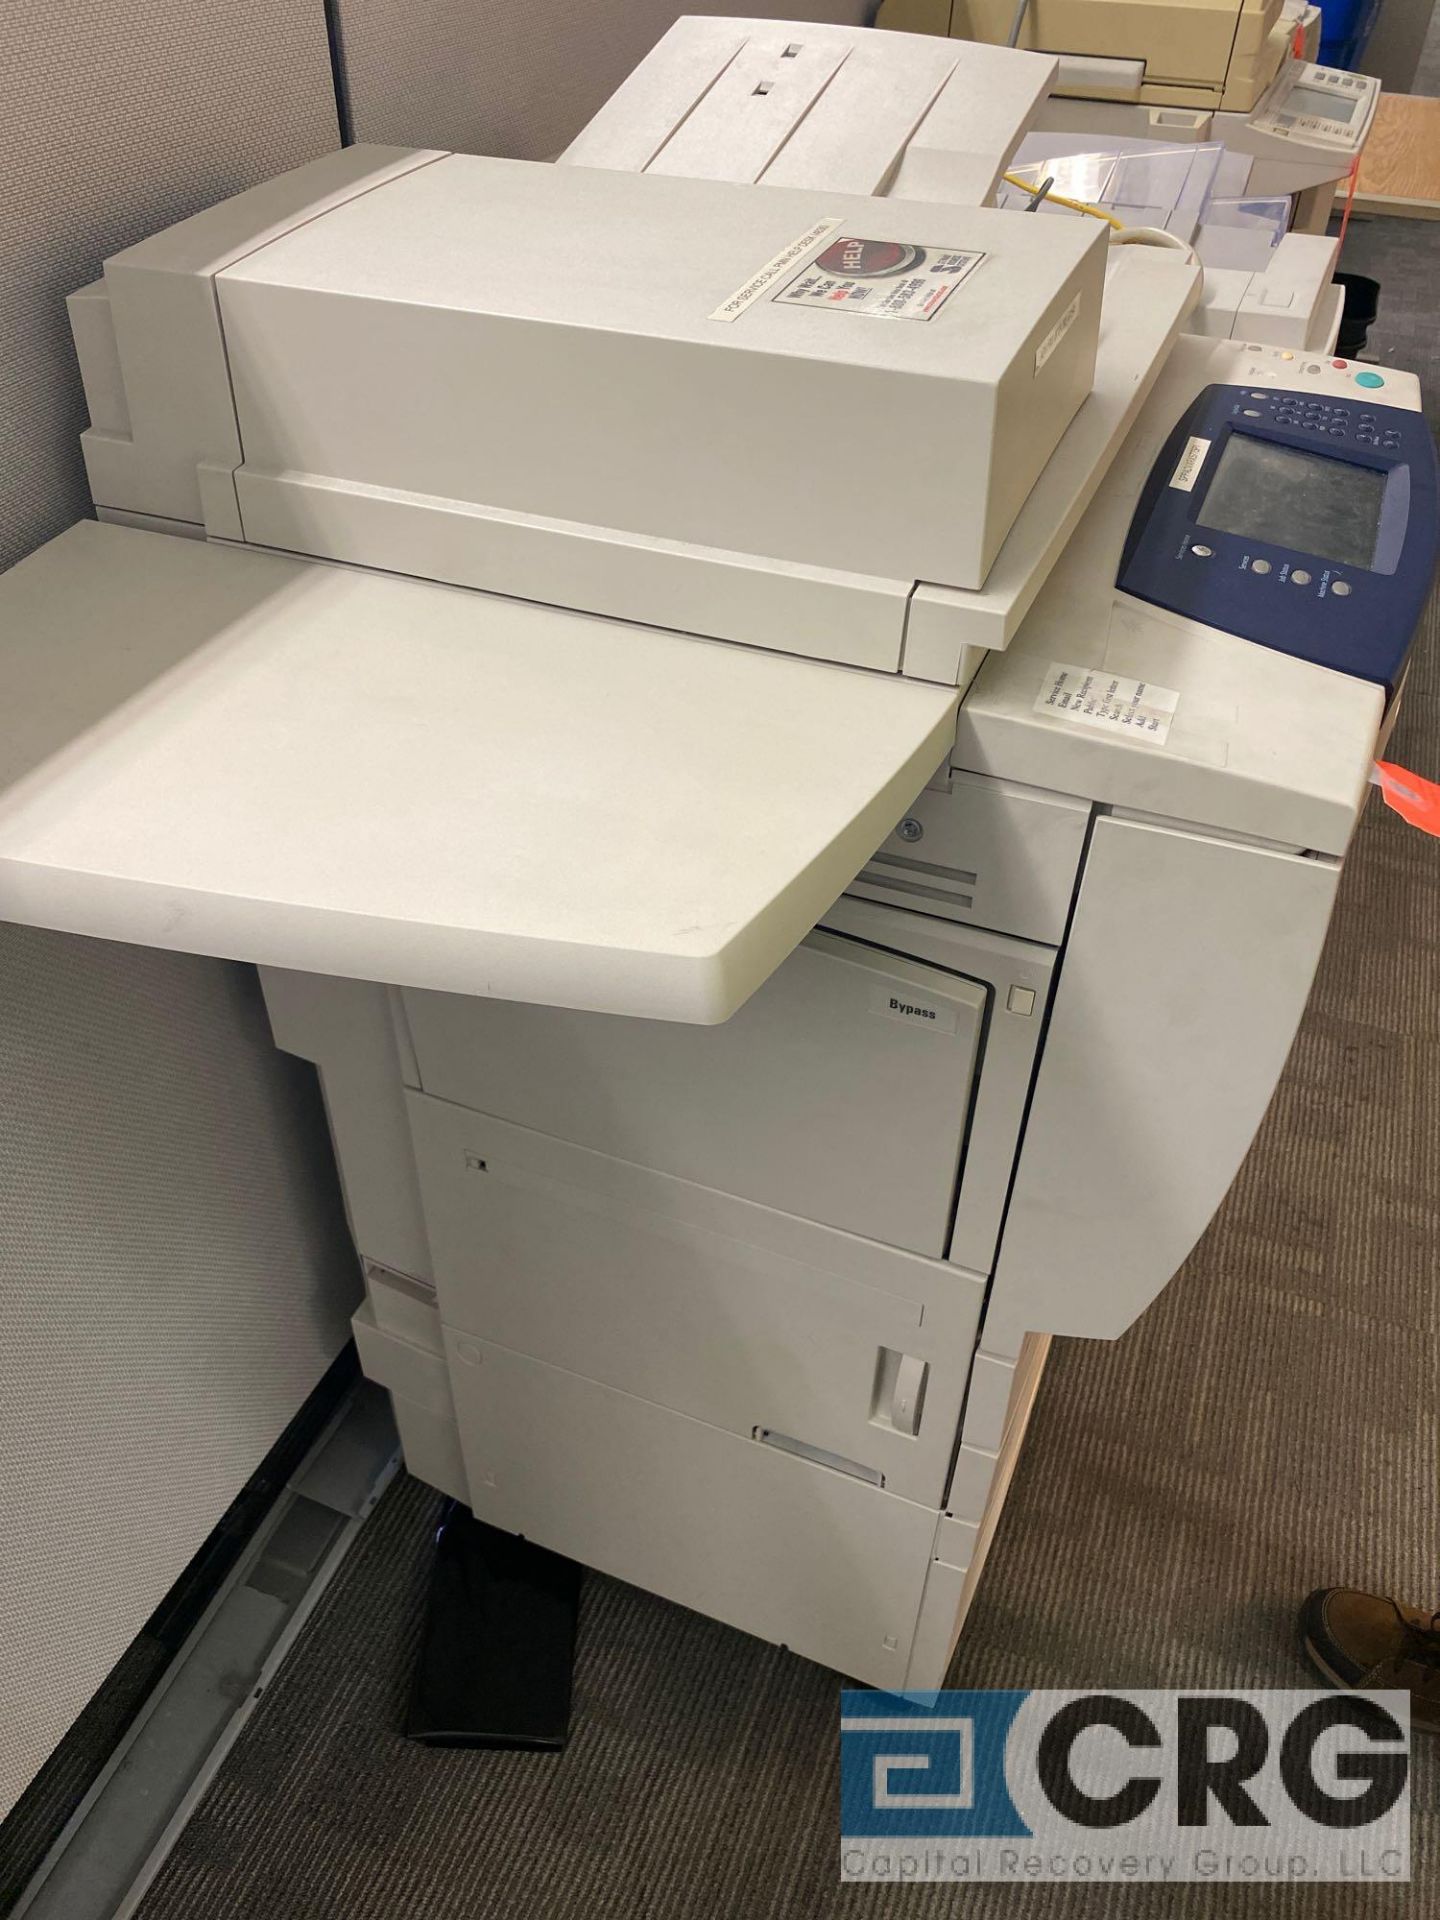 2012 Xerox workcentre 5775, fax, print, and scanner all-in-one - Image 2 of 3